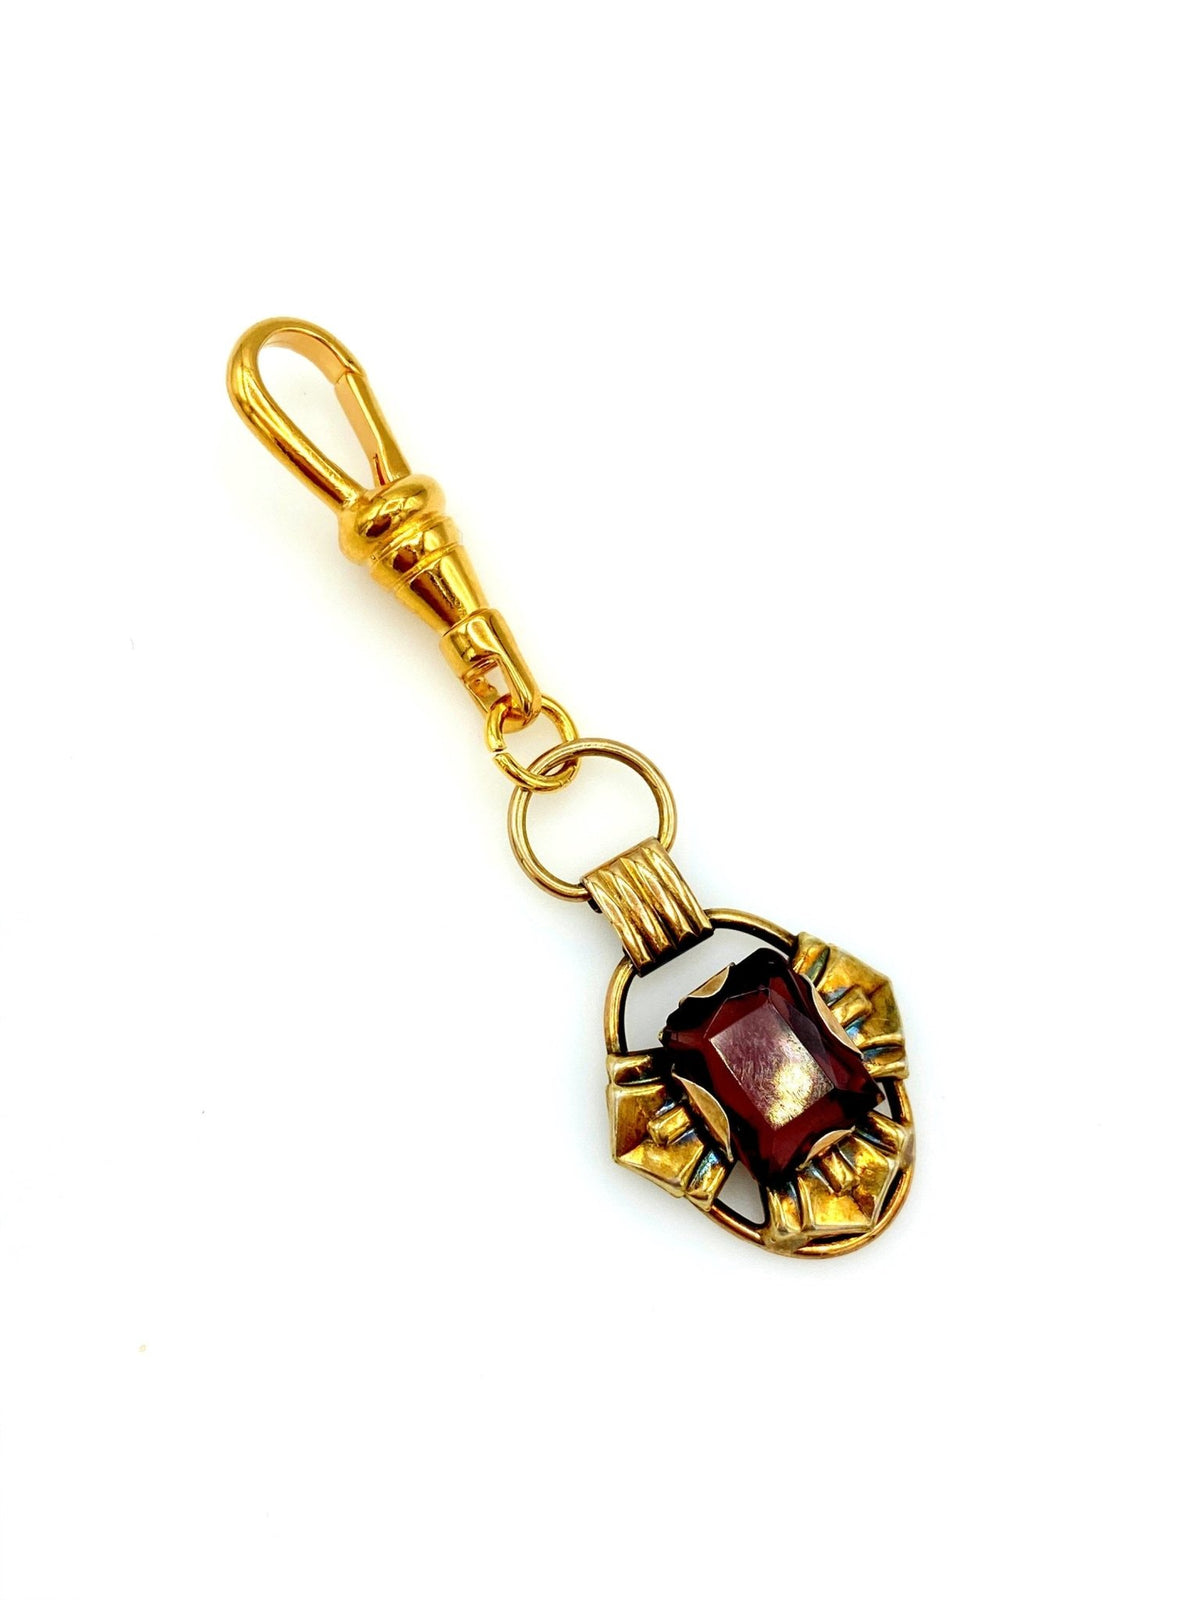 Purple Amethyst Crystal Victorian Revival Charm - 24 Wishes Vintage Jewelry